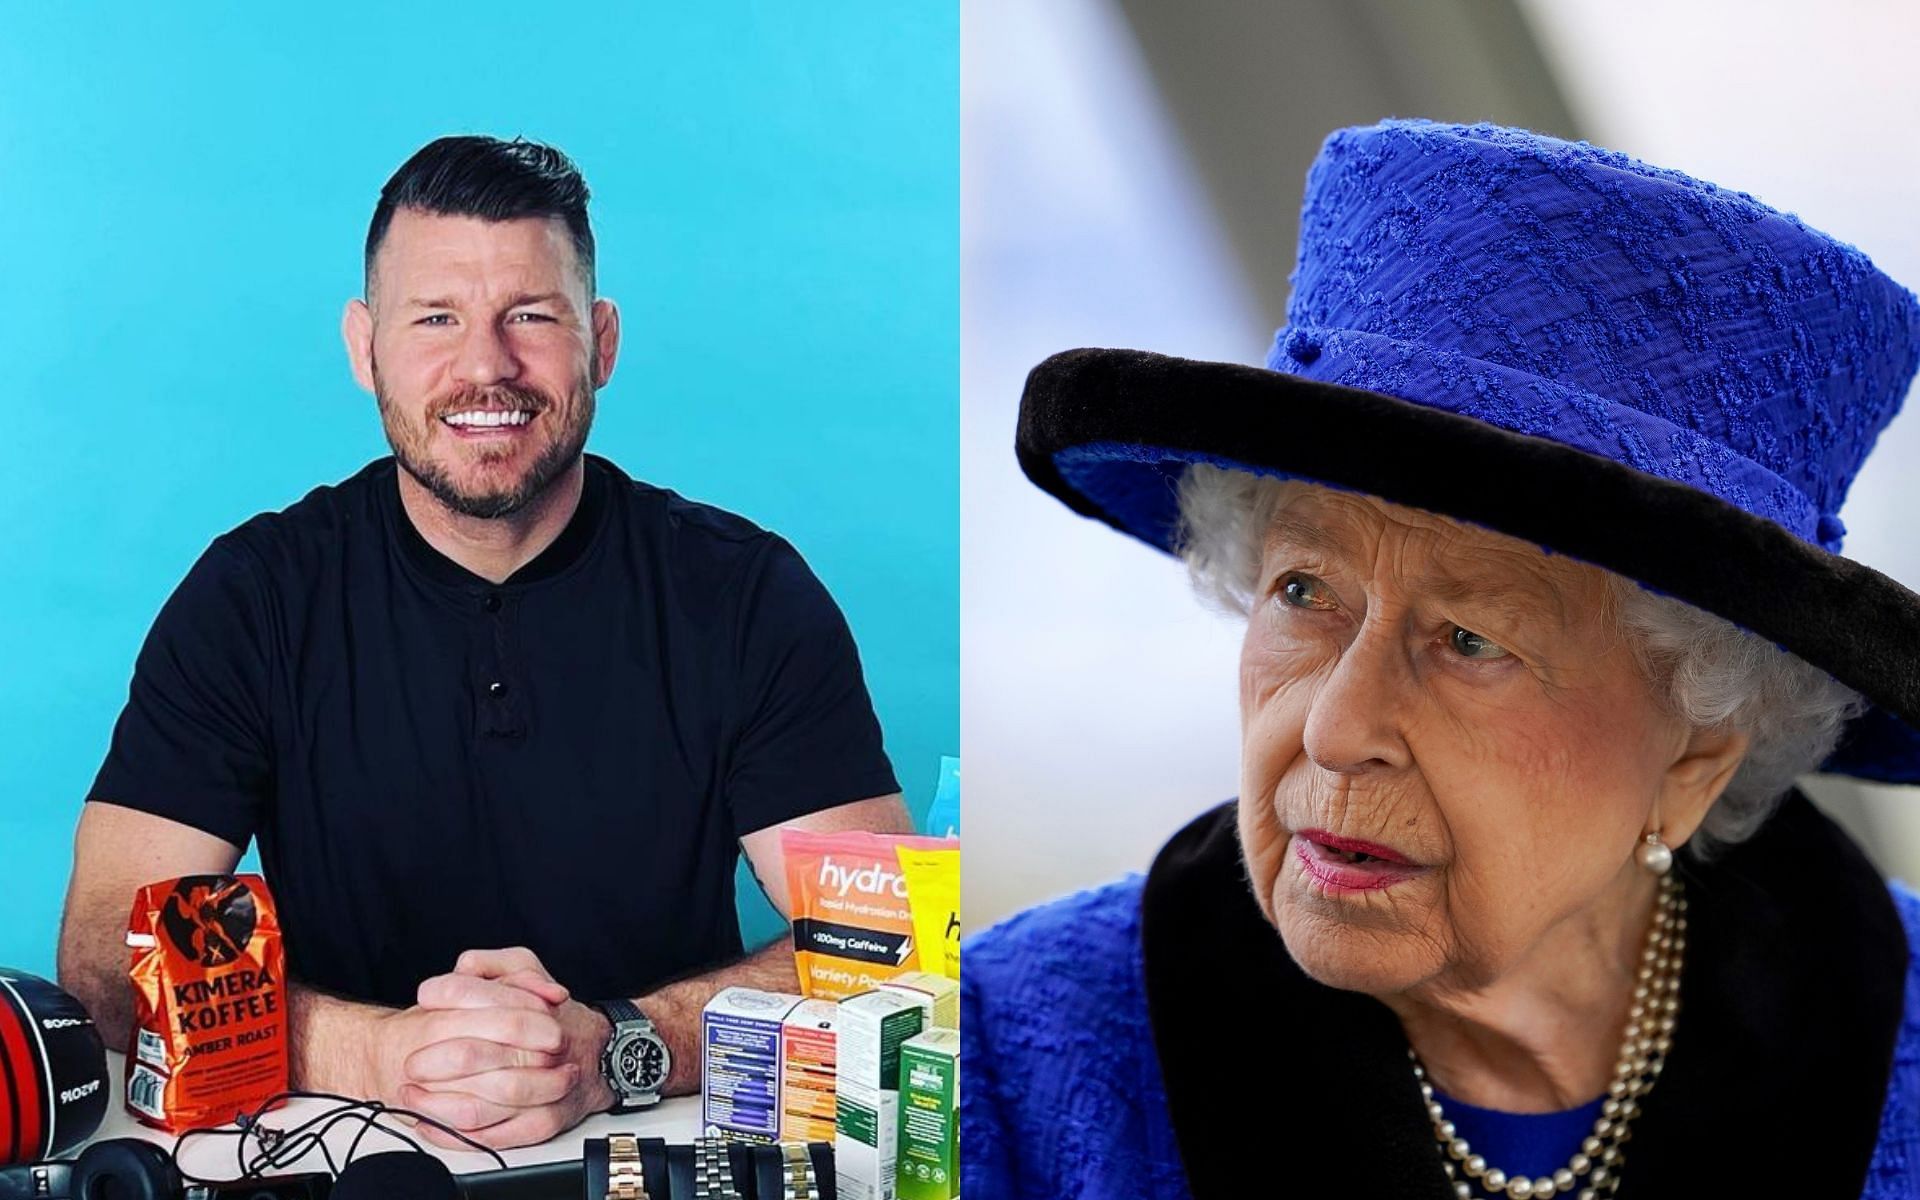 Michael Bisping (left) and Queen Elizabeth II (right) [Photo credit: @mikebisping on Instagram]